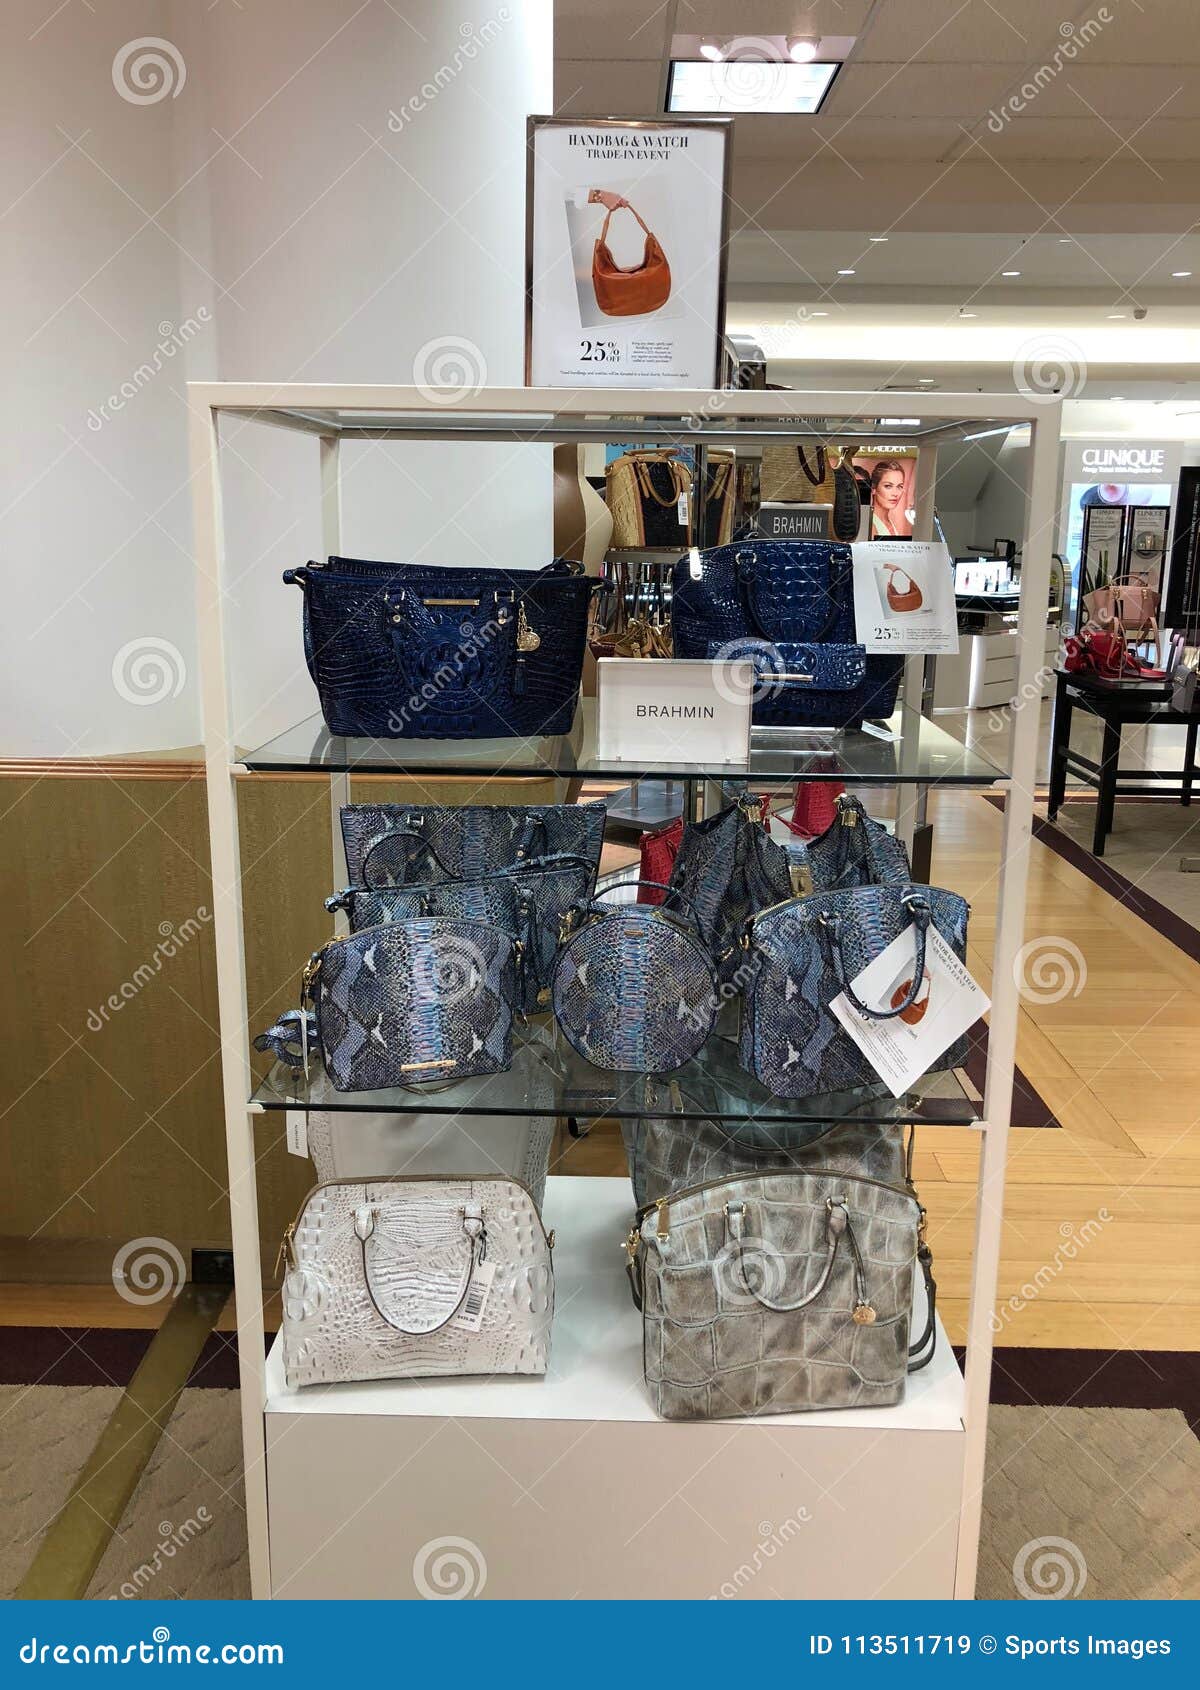 Brahmin Handbags in a Department Store Editorial Stock Image - Image of  scottsdale, store: 113511719